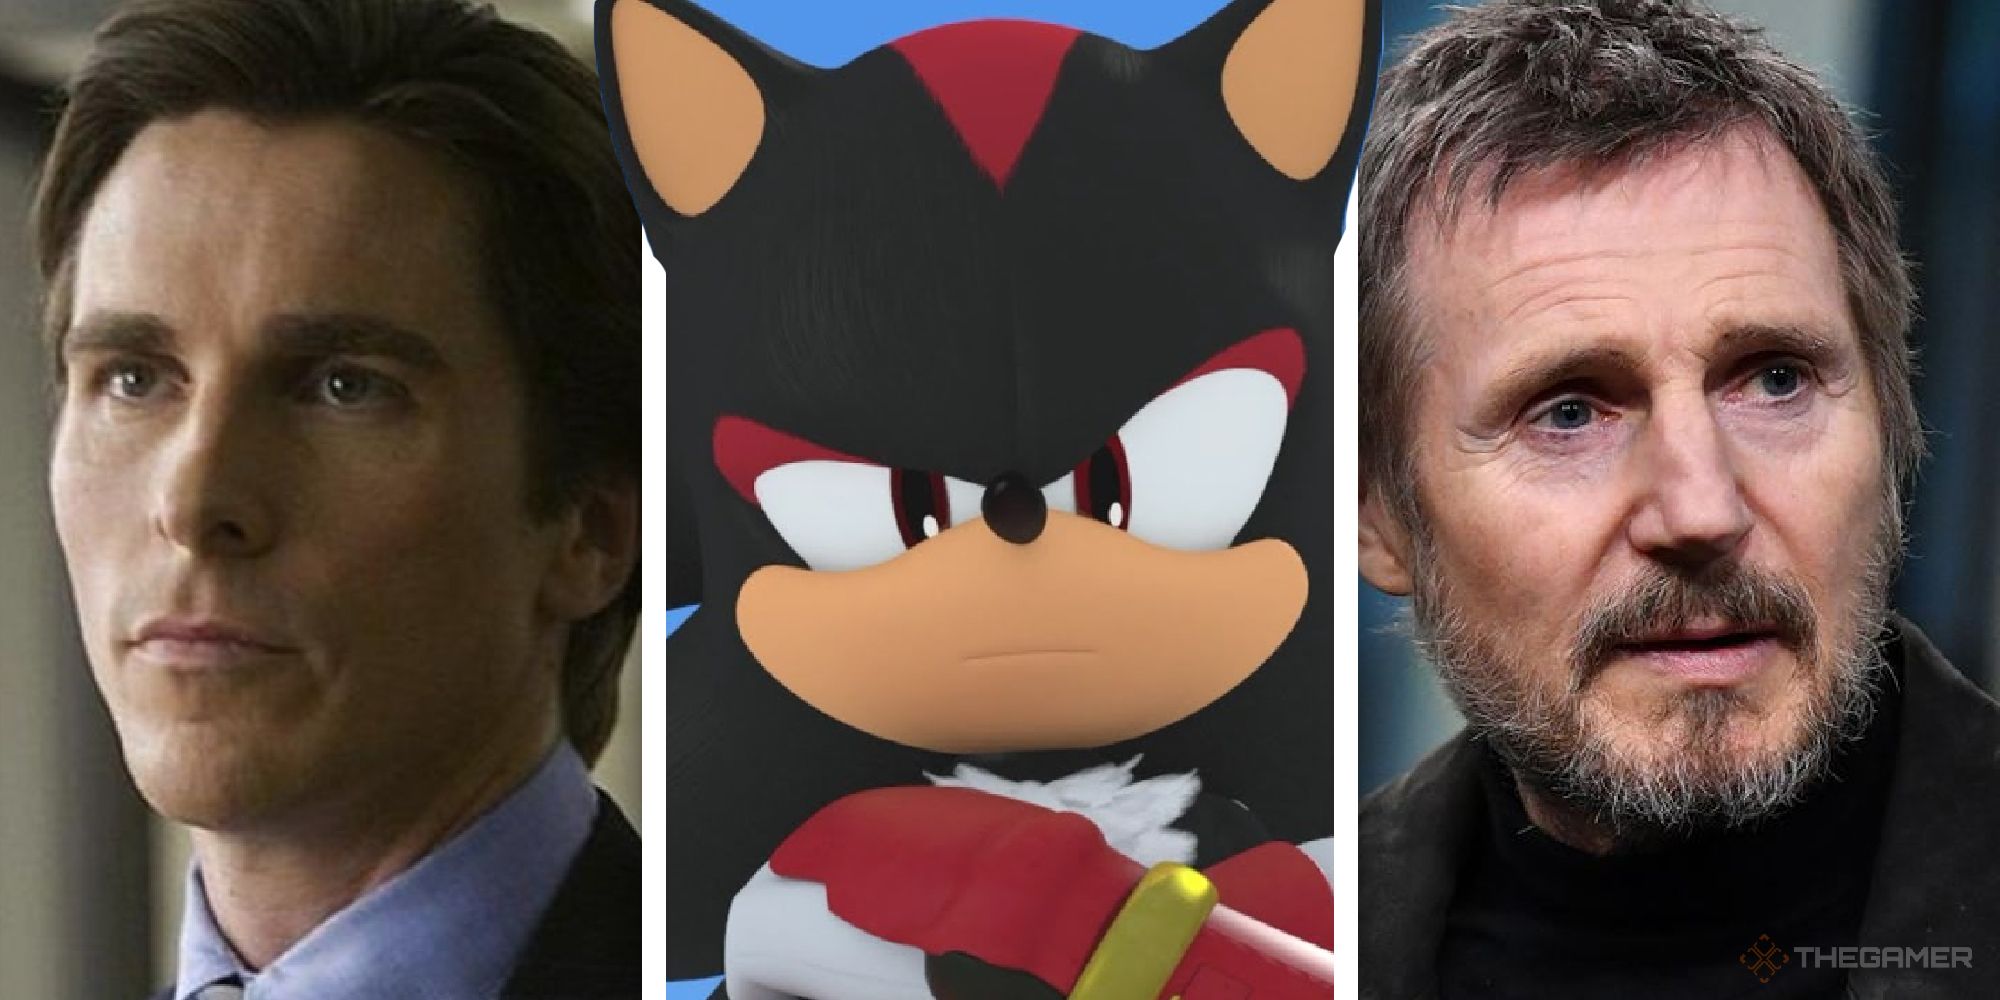 Shadow the Hedgehog is in the next Sonic movie and all I can think about  now is which Hollywood tough guy will voice him